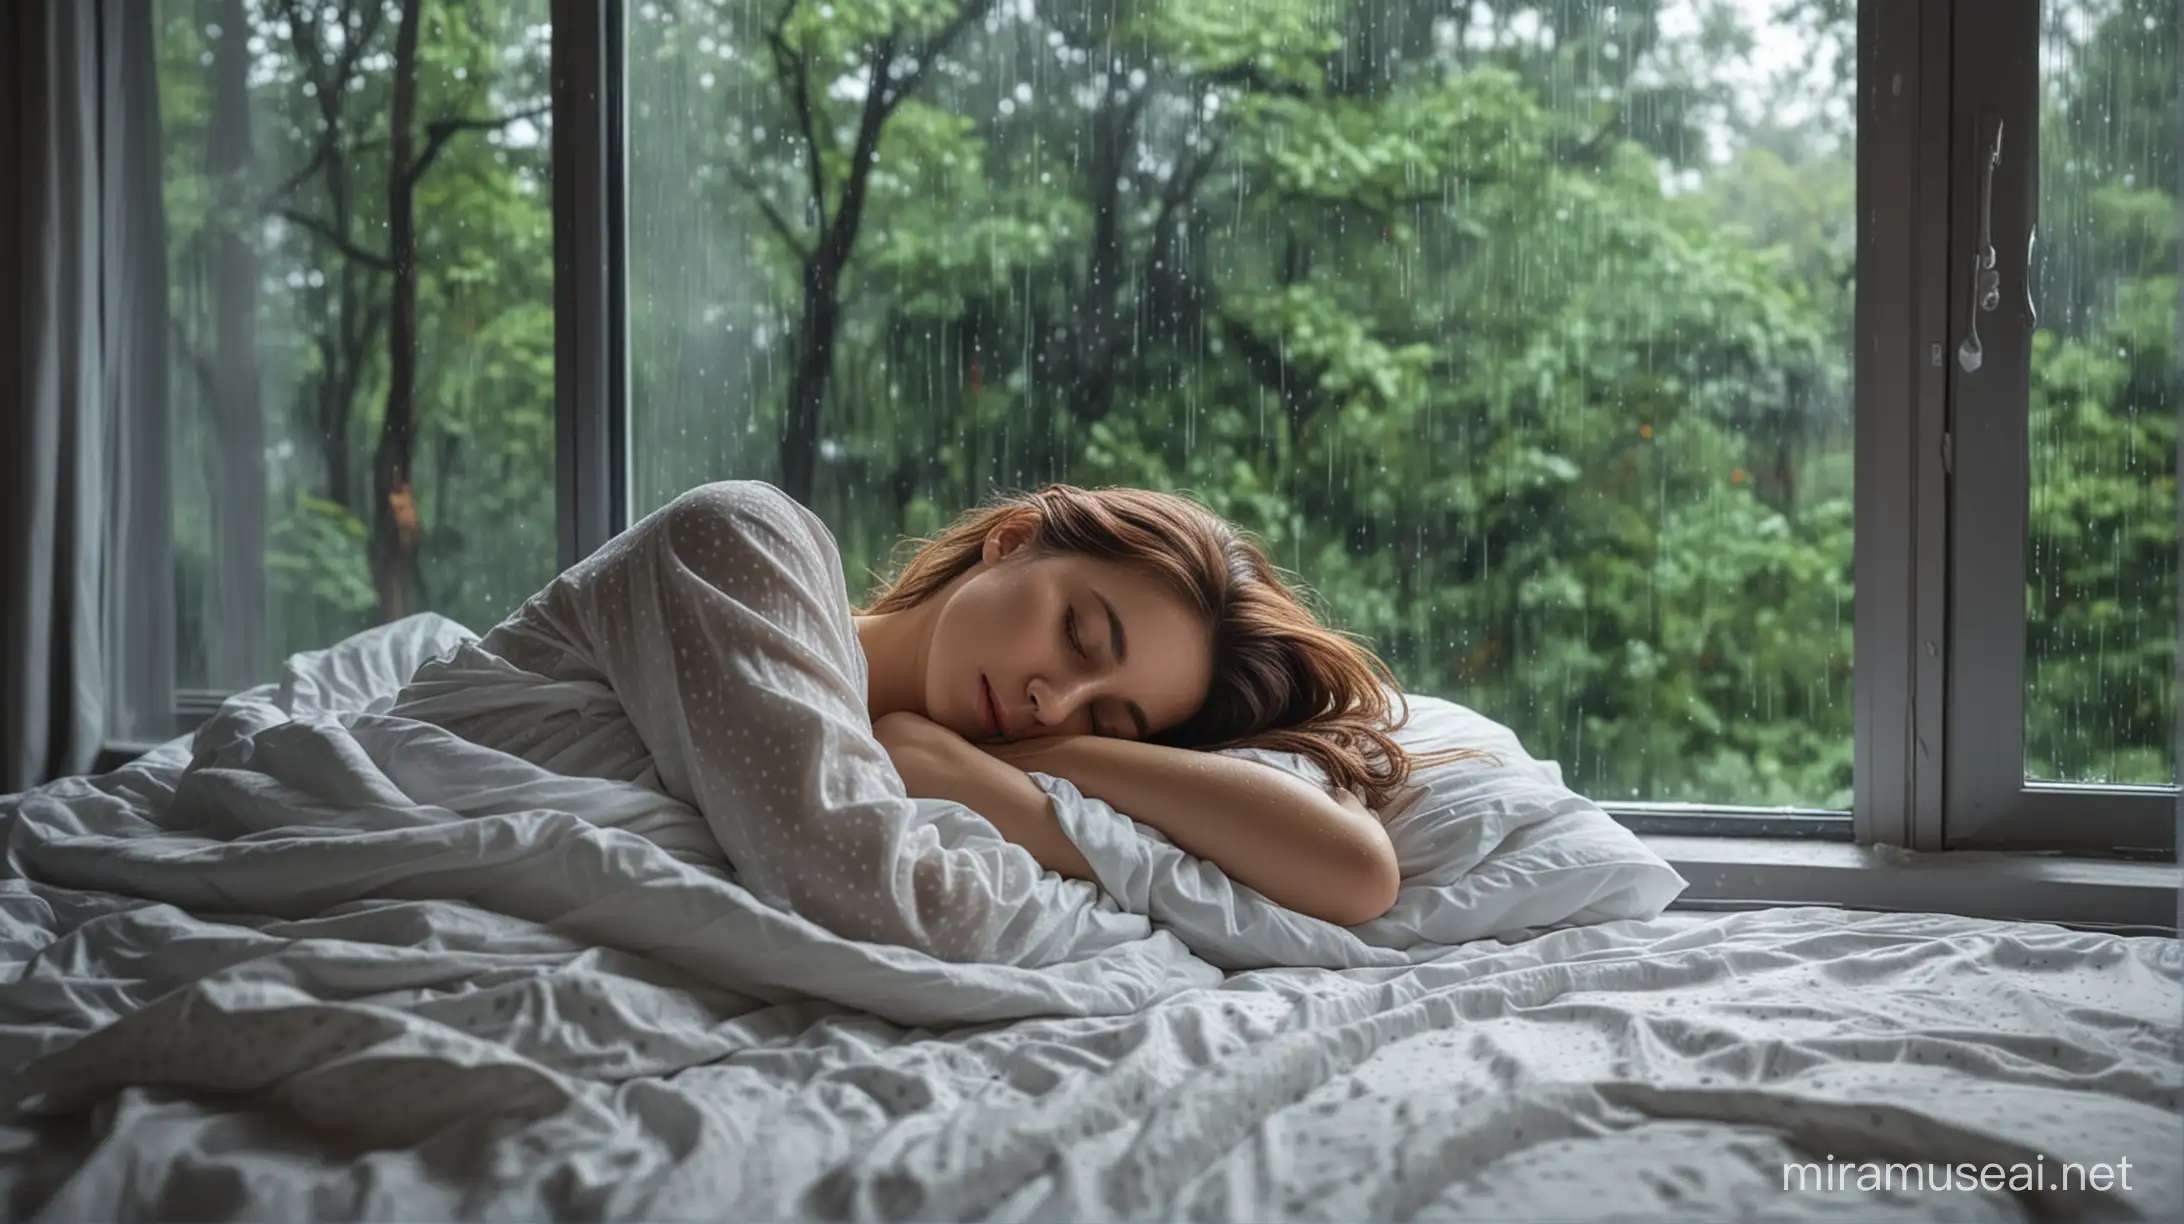 beautiful woman sleeping in the bedroom with the bedroom window showing a rainy atmosphere on the edge of the forest